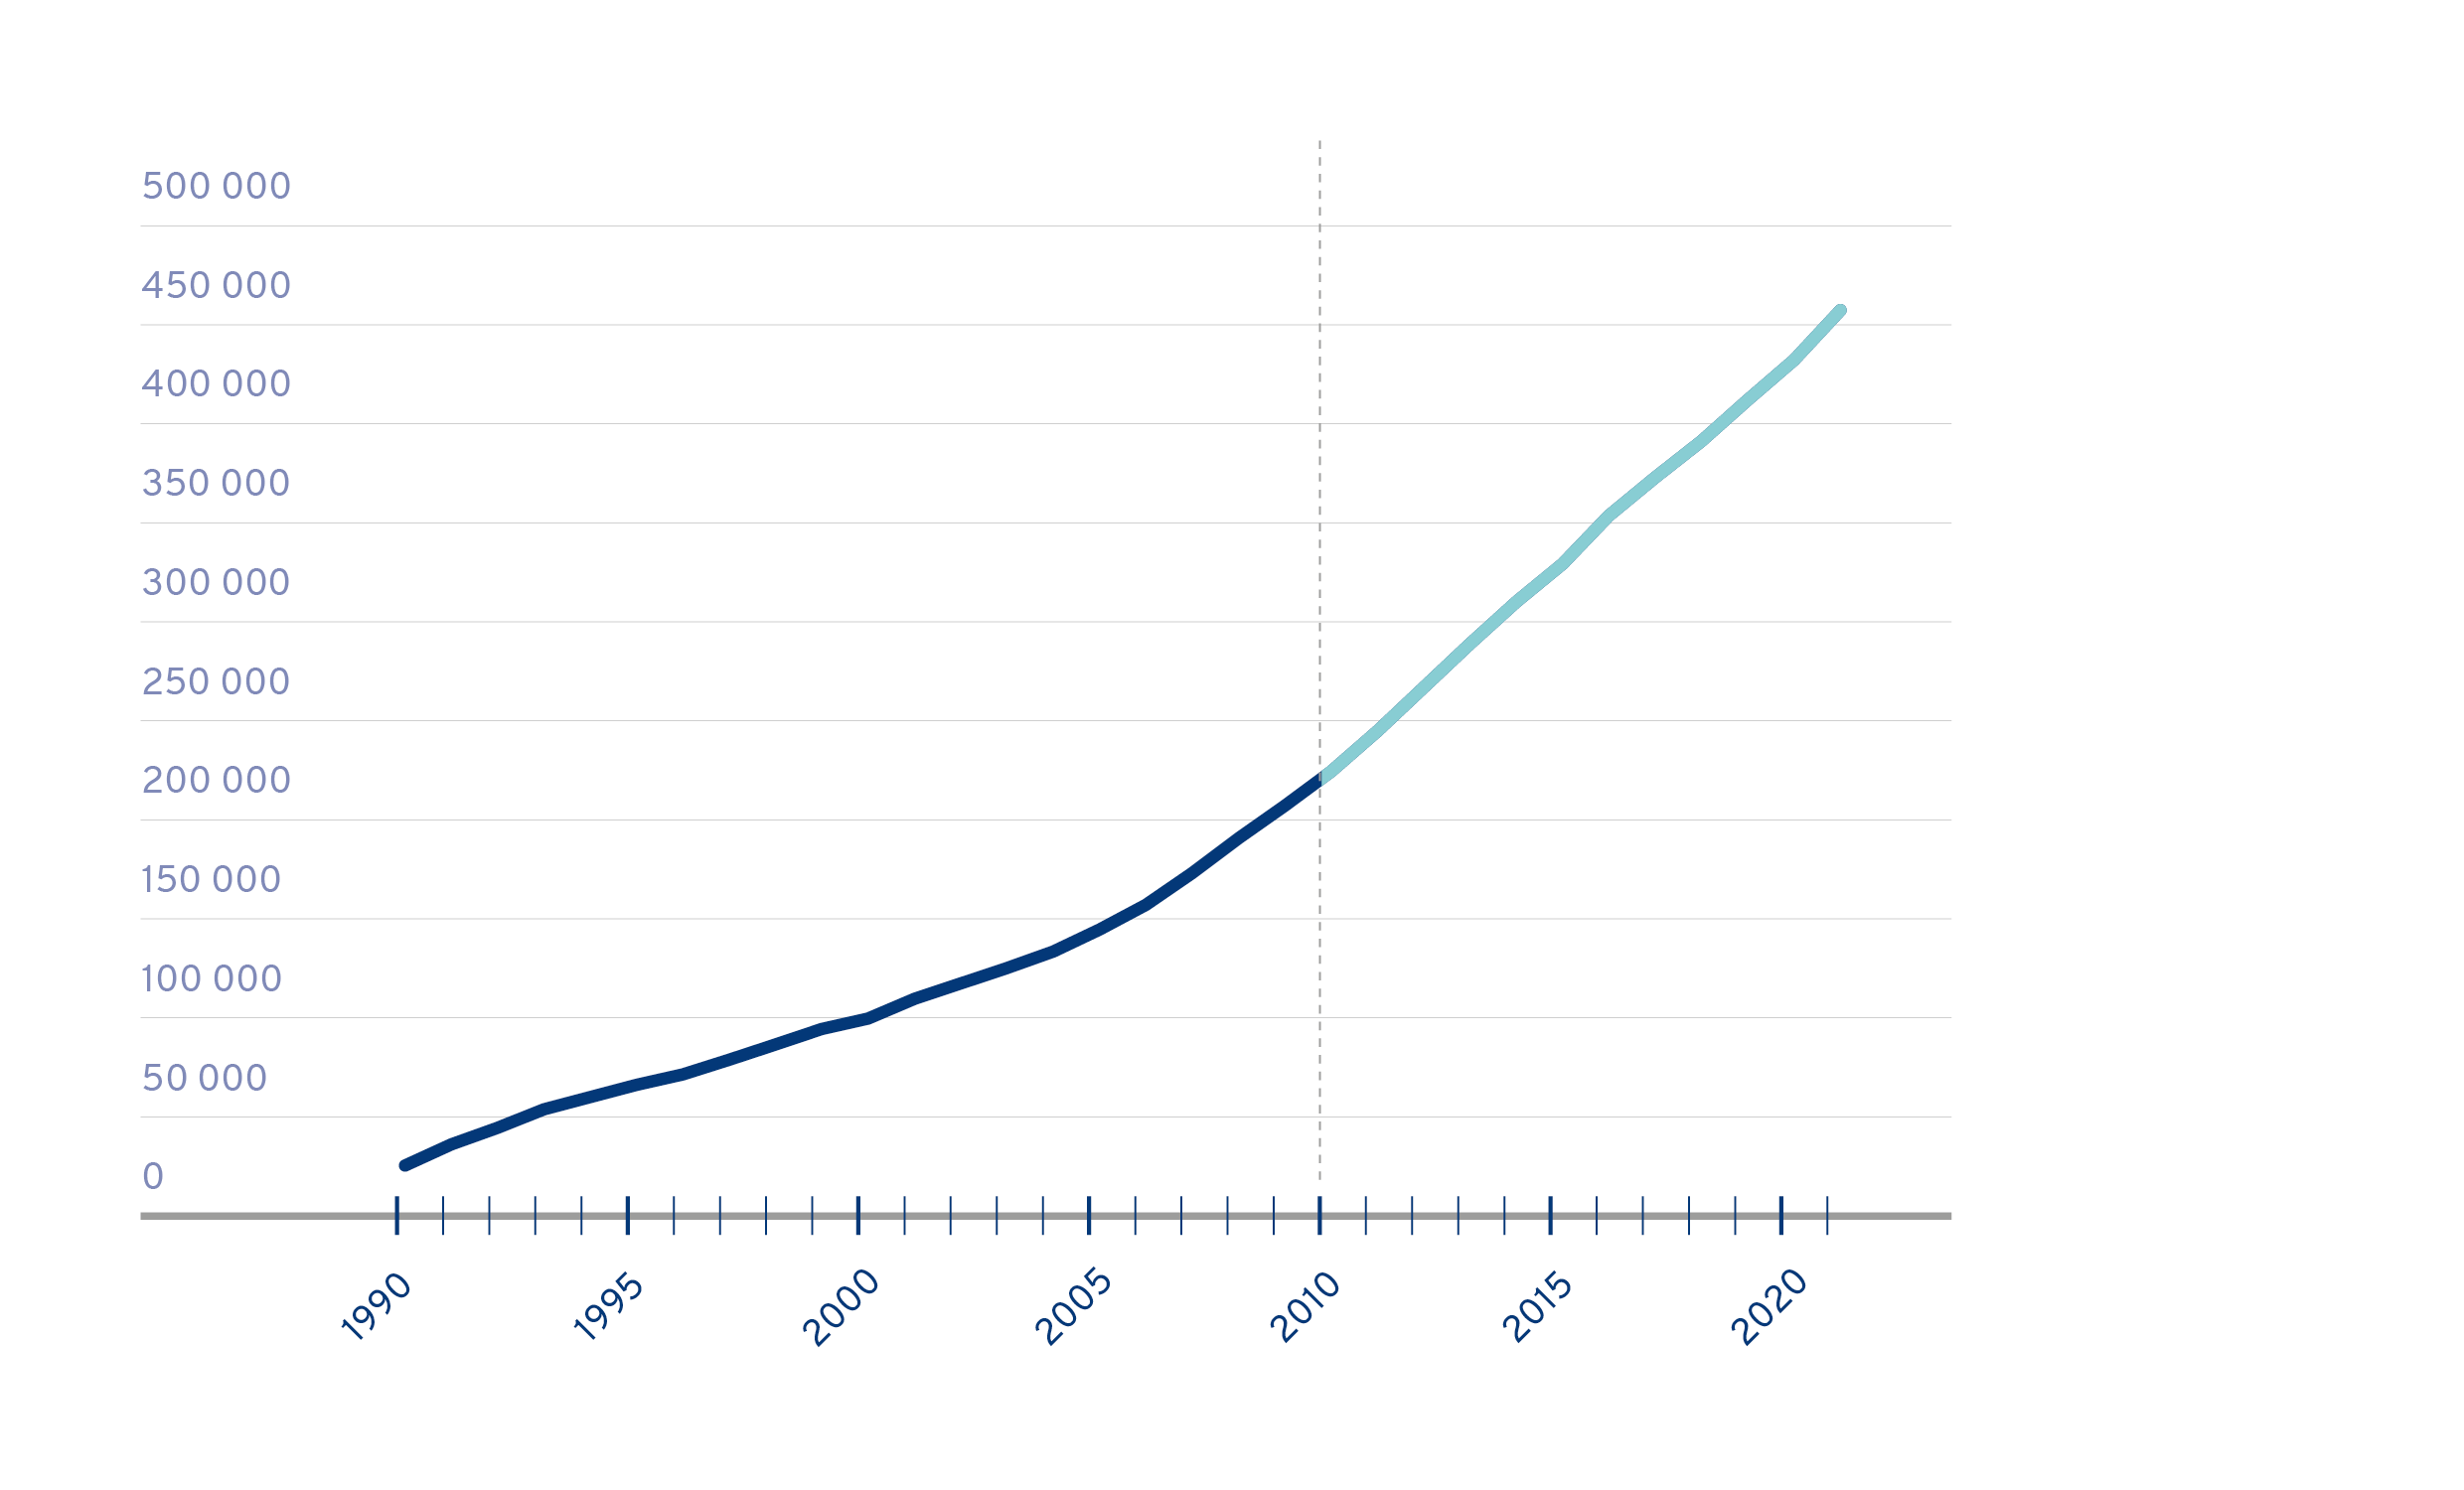 Graph showing the growth in the number of foreign-language speakers in Finland between 1990 and 2020. The number of foreign-language speakers in Finland has been growing significantly since the 1990s. The growth has particularly been accelerating since the 2010s.